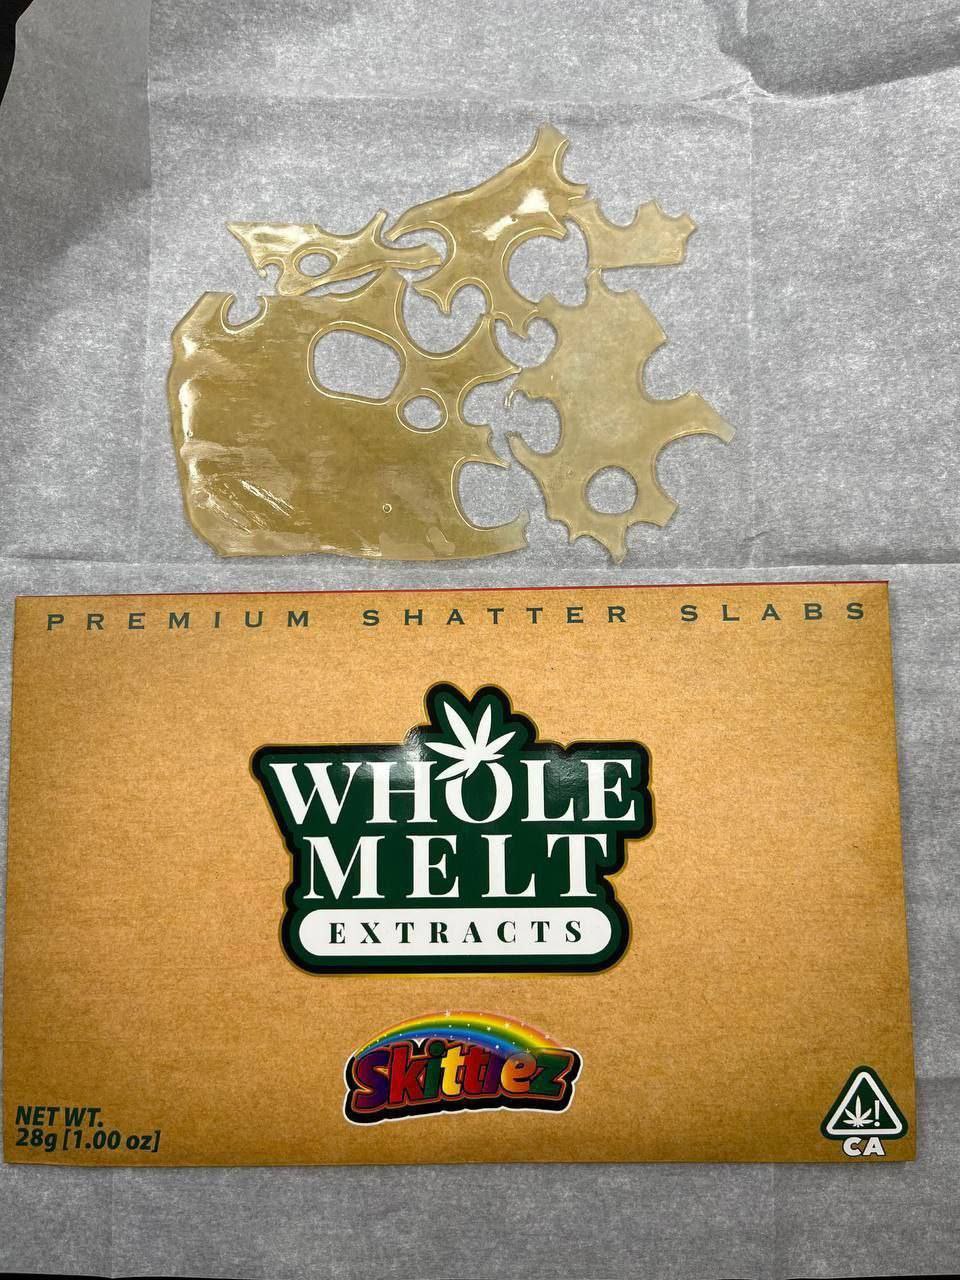 A package labeled "Whole Melt Extracts" and "Import placeholder for 59" with "Premium Shatter Slabs" is displayed beneath a sheet of light amber-colored, brittle cannabis concentrate. The package shows a net weight of 28g (1.00 oz) and has a cannabis warning symbol on the bottom right corner.